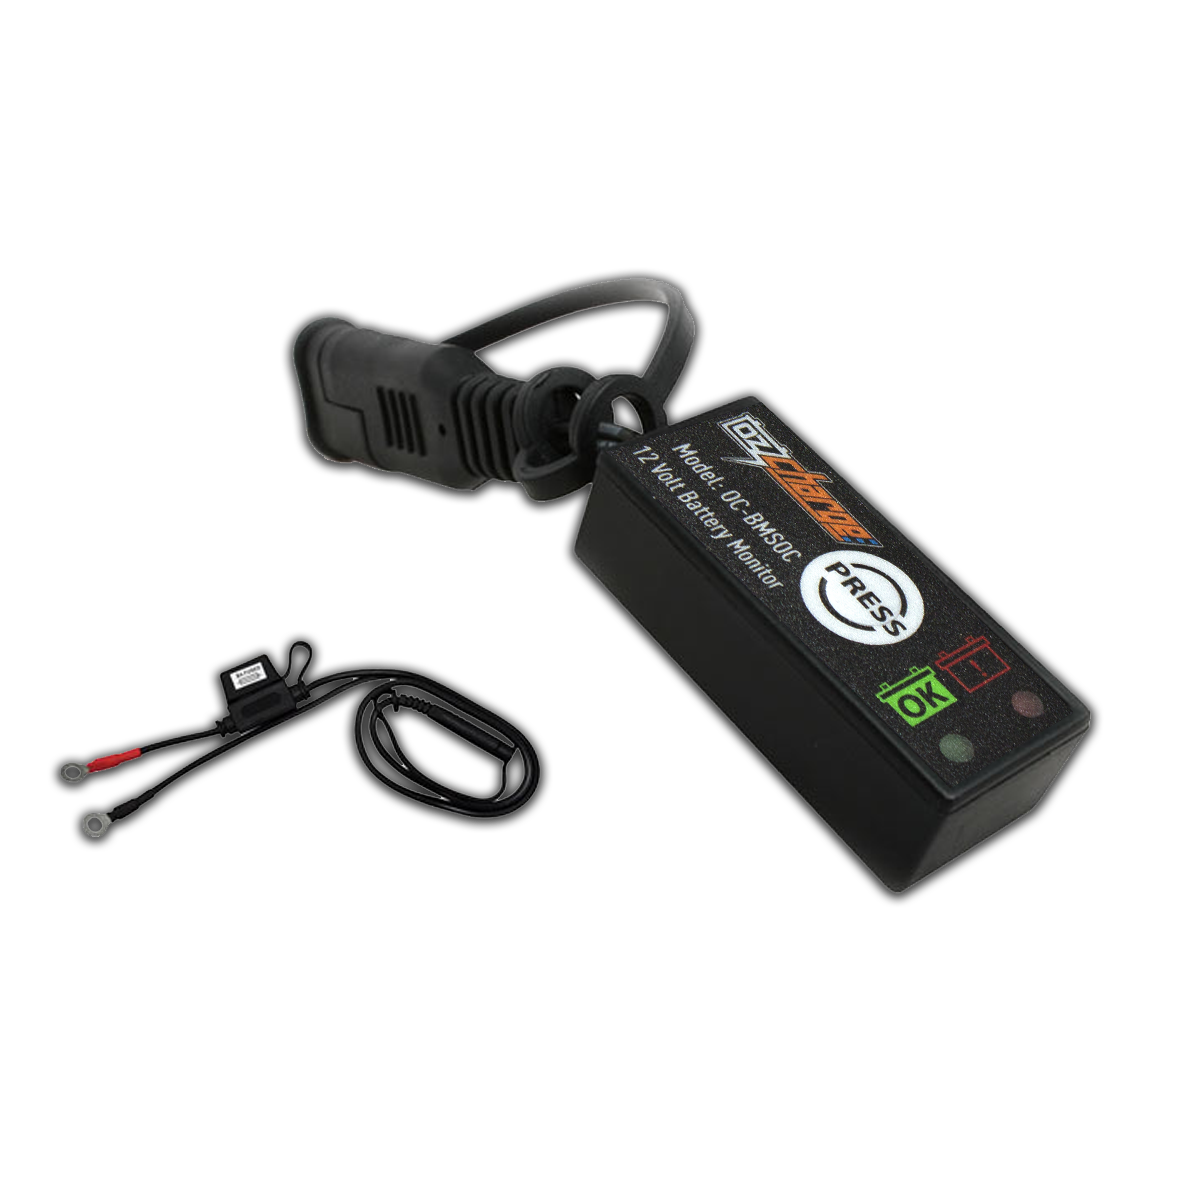 12 Volt Battery Monitor State of Charge Indicator